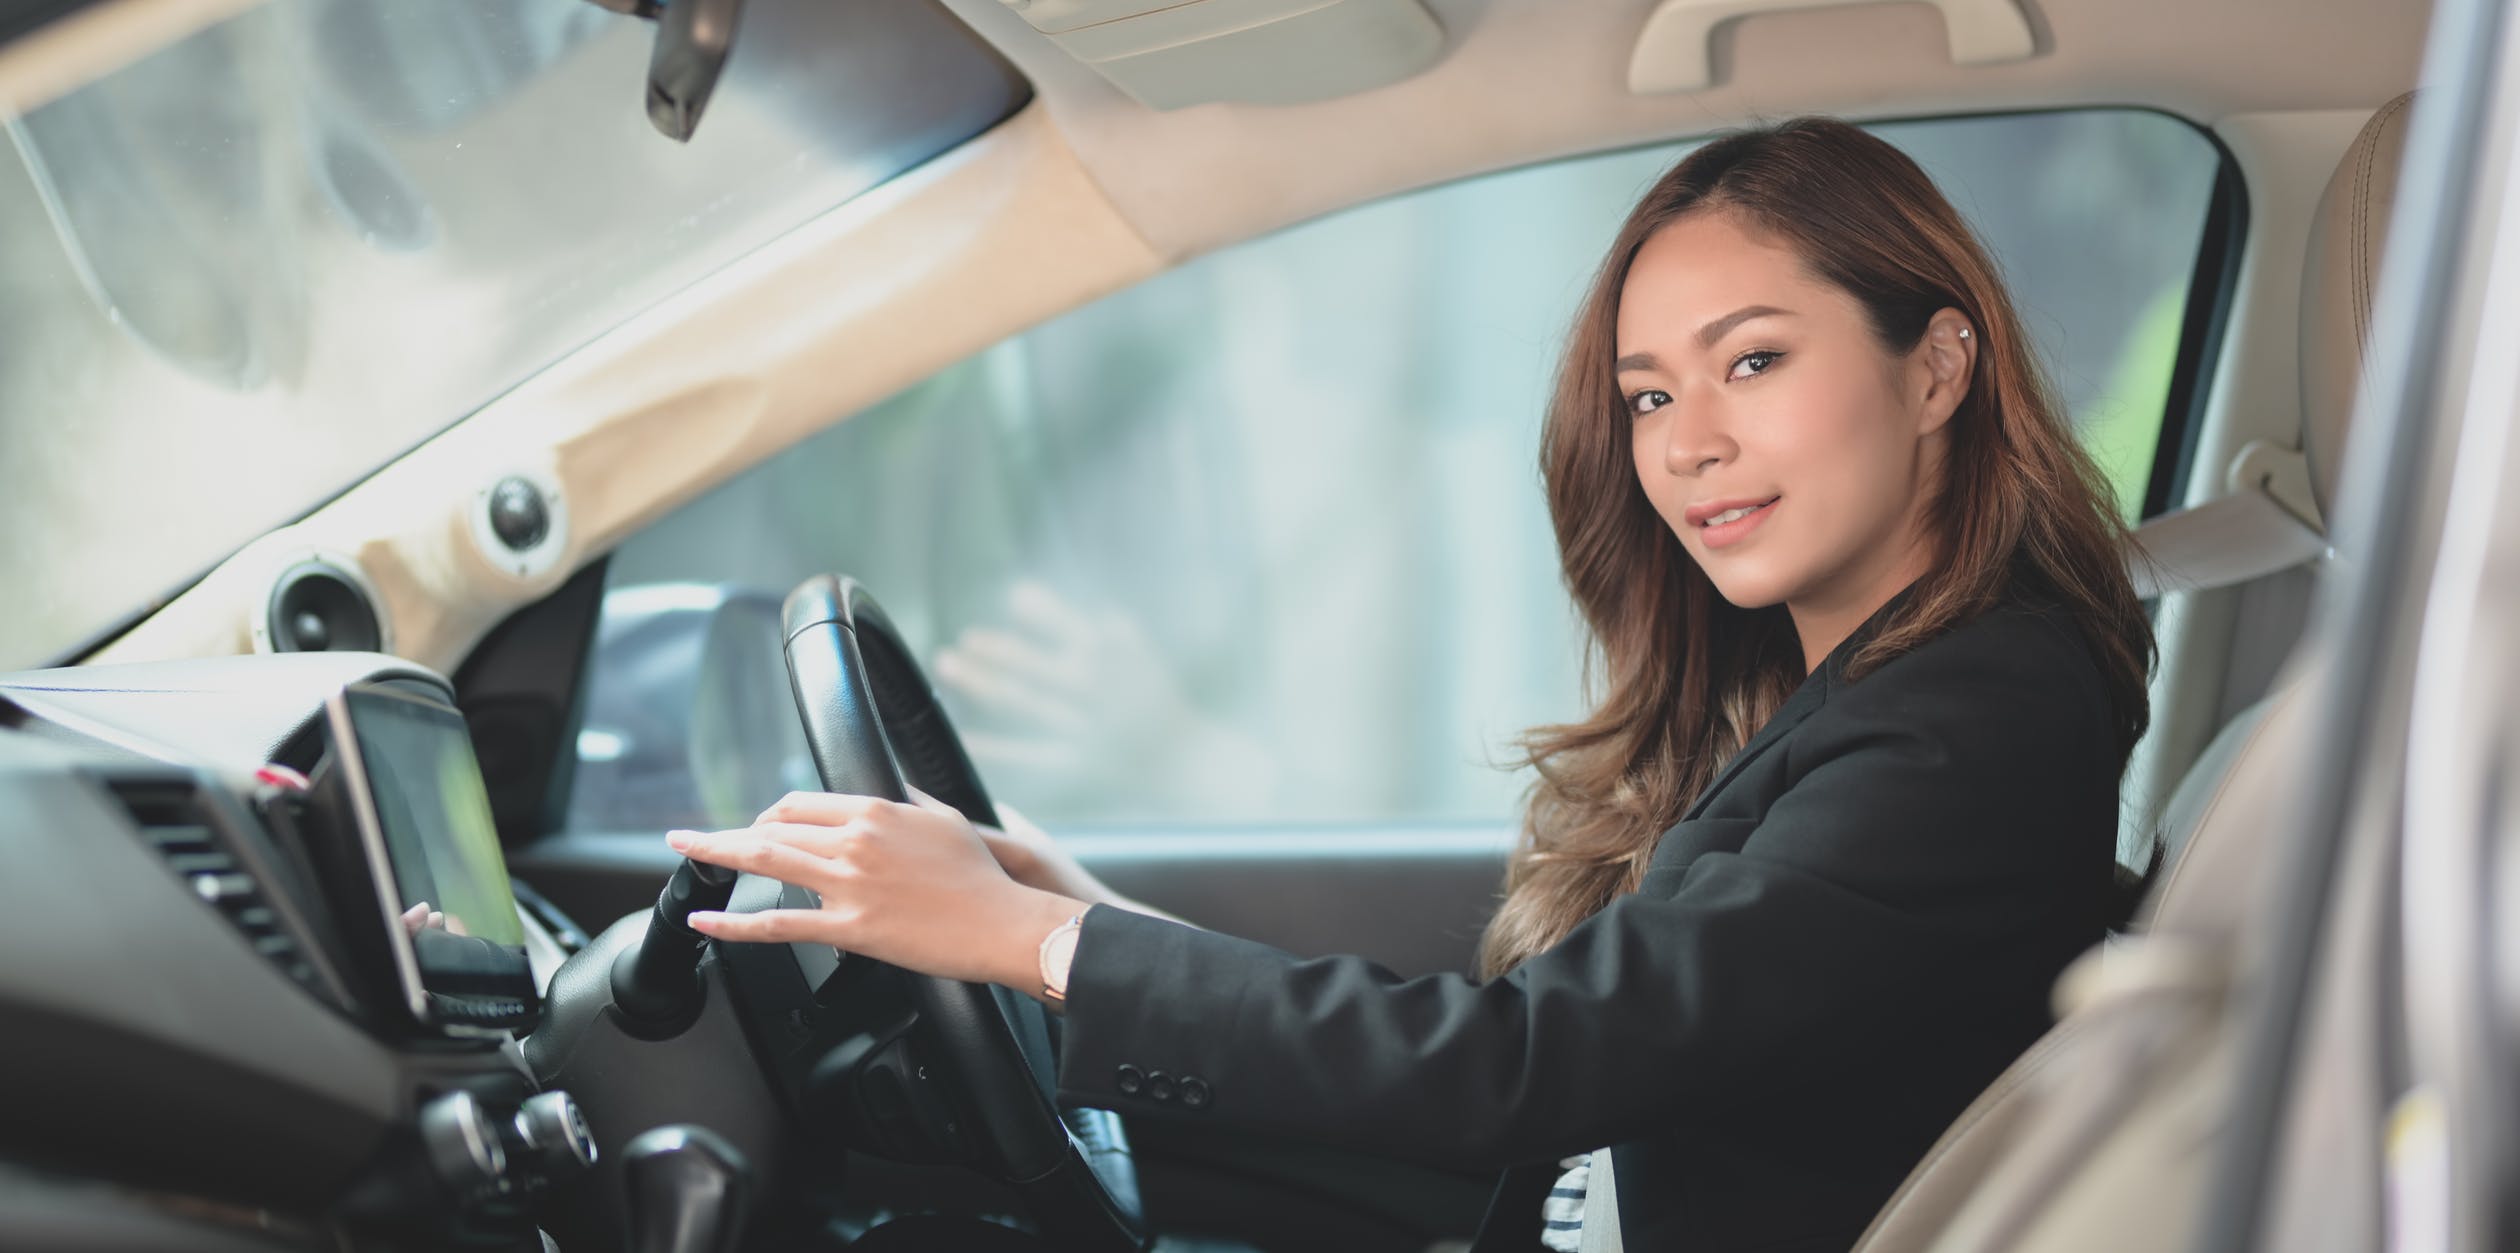 Learning to Drive: What You Need to Know